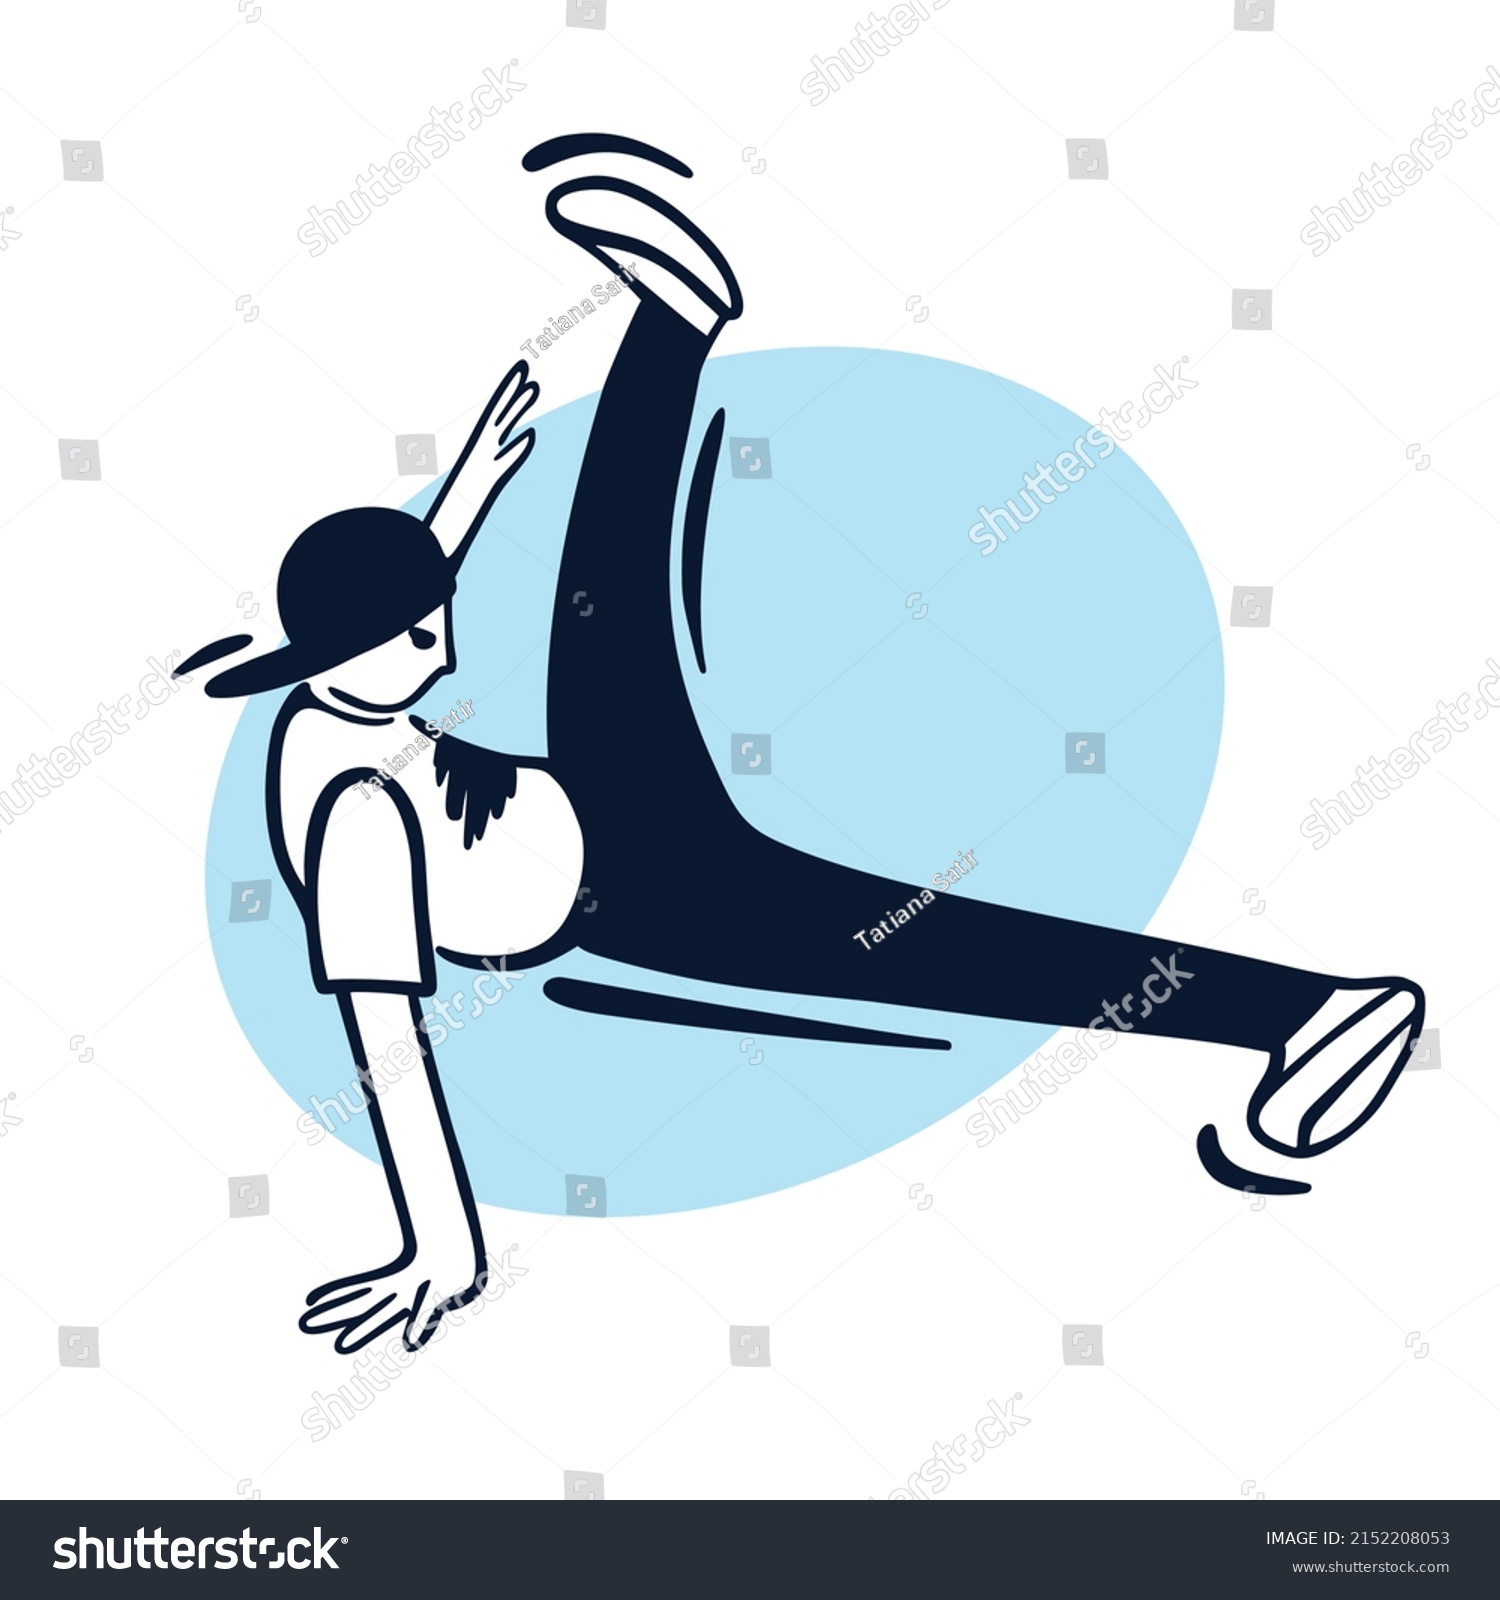 SVG of Break dancer performing stunts. B-boy jumping. Street dance flare move. Black and white character on light blue circle background. Sketch style vector design illustrations. svg